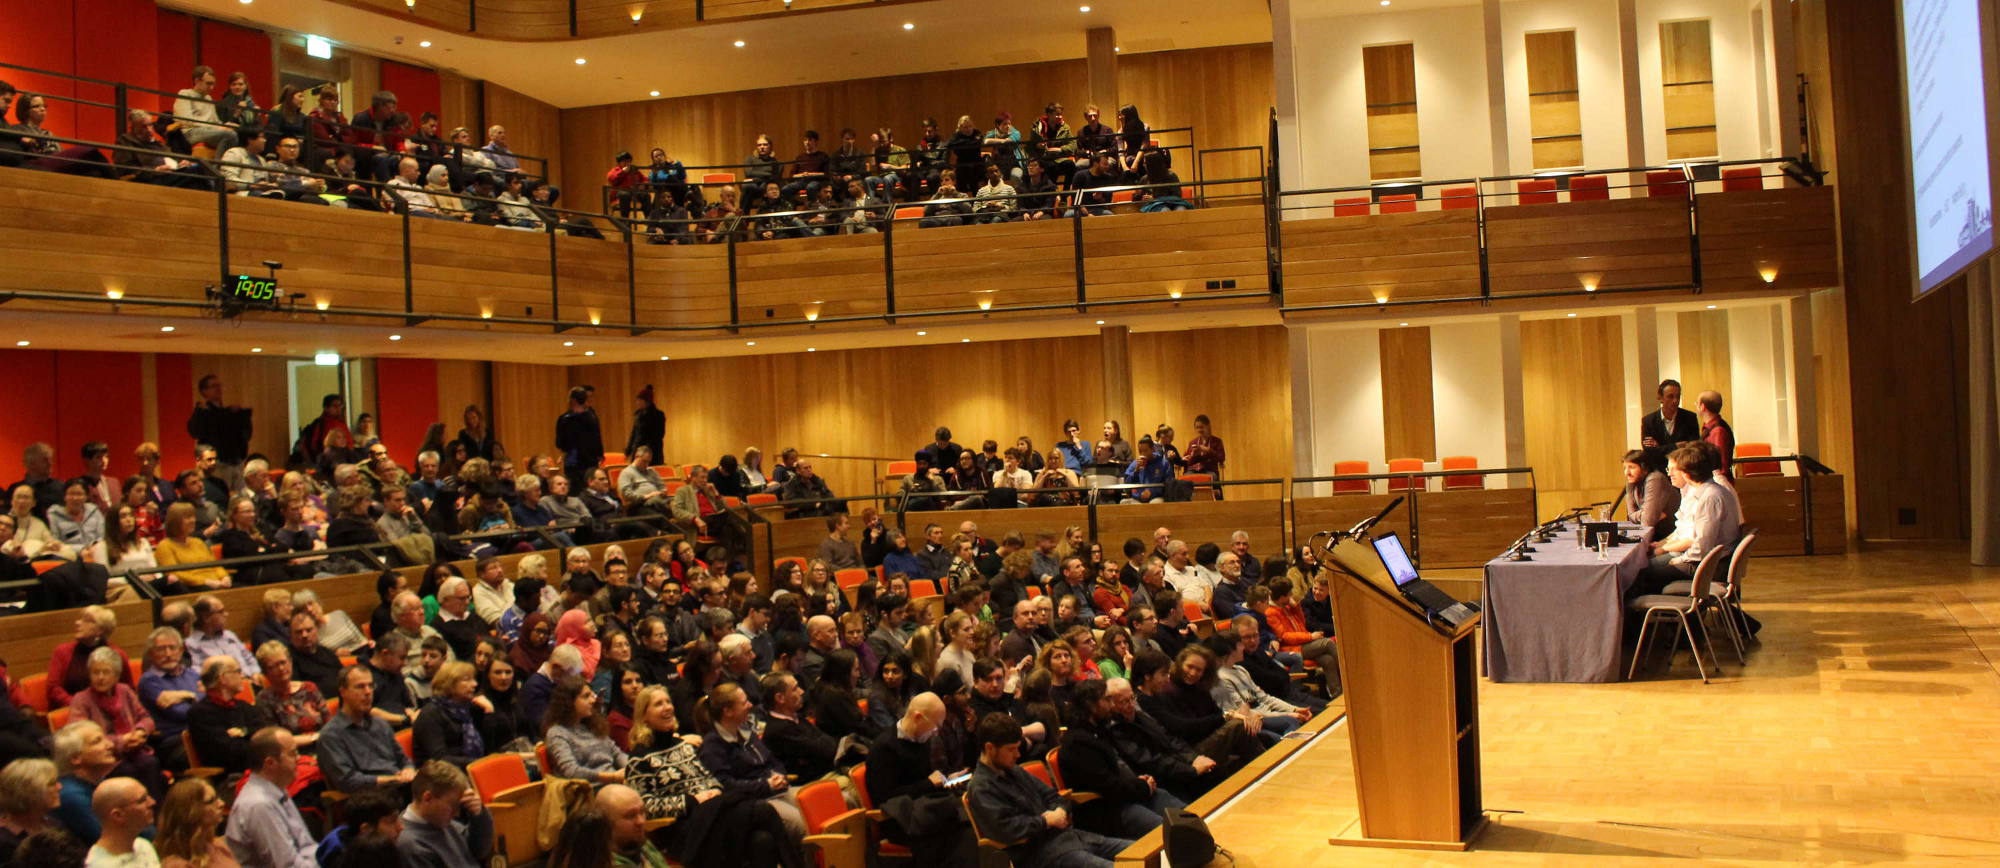 Over 400 people came to the gravitational wave detection event on 17 February 2016. Image credit: Hannah Middleton